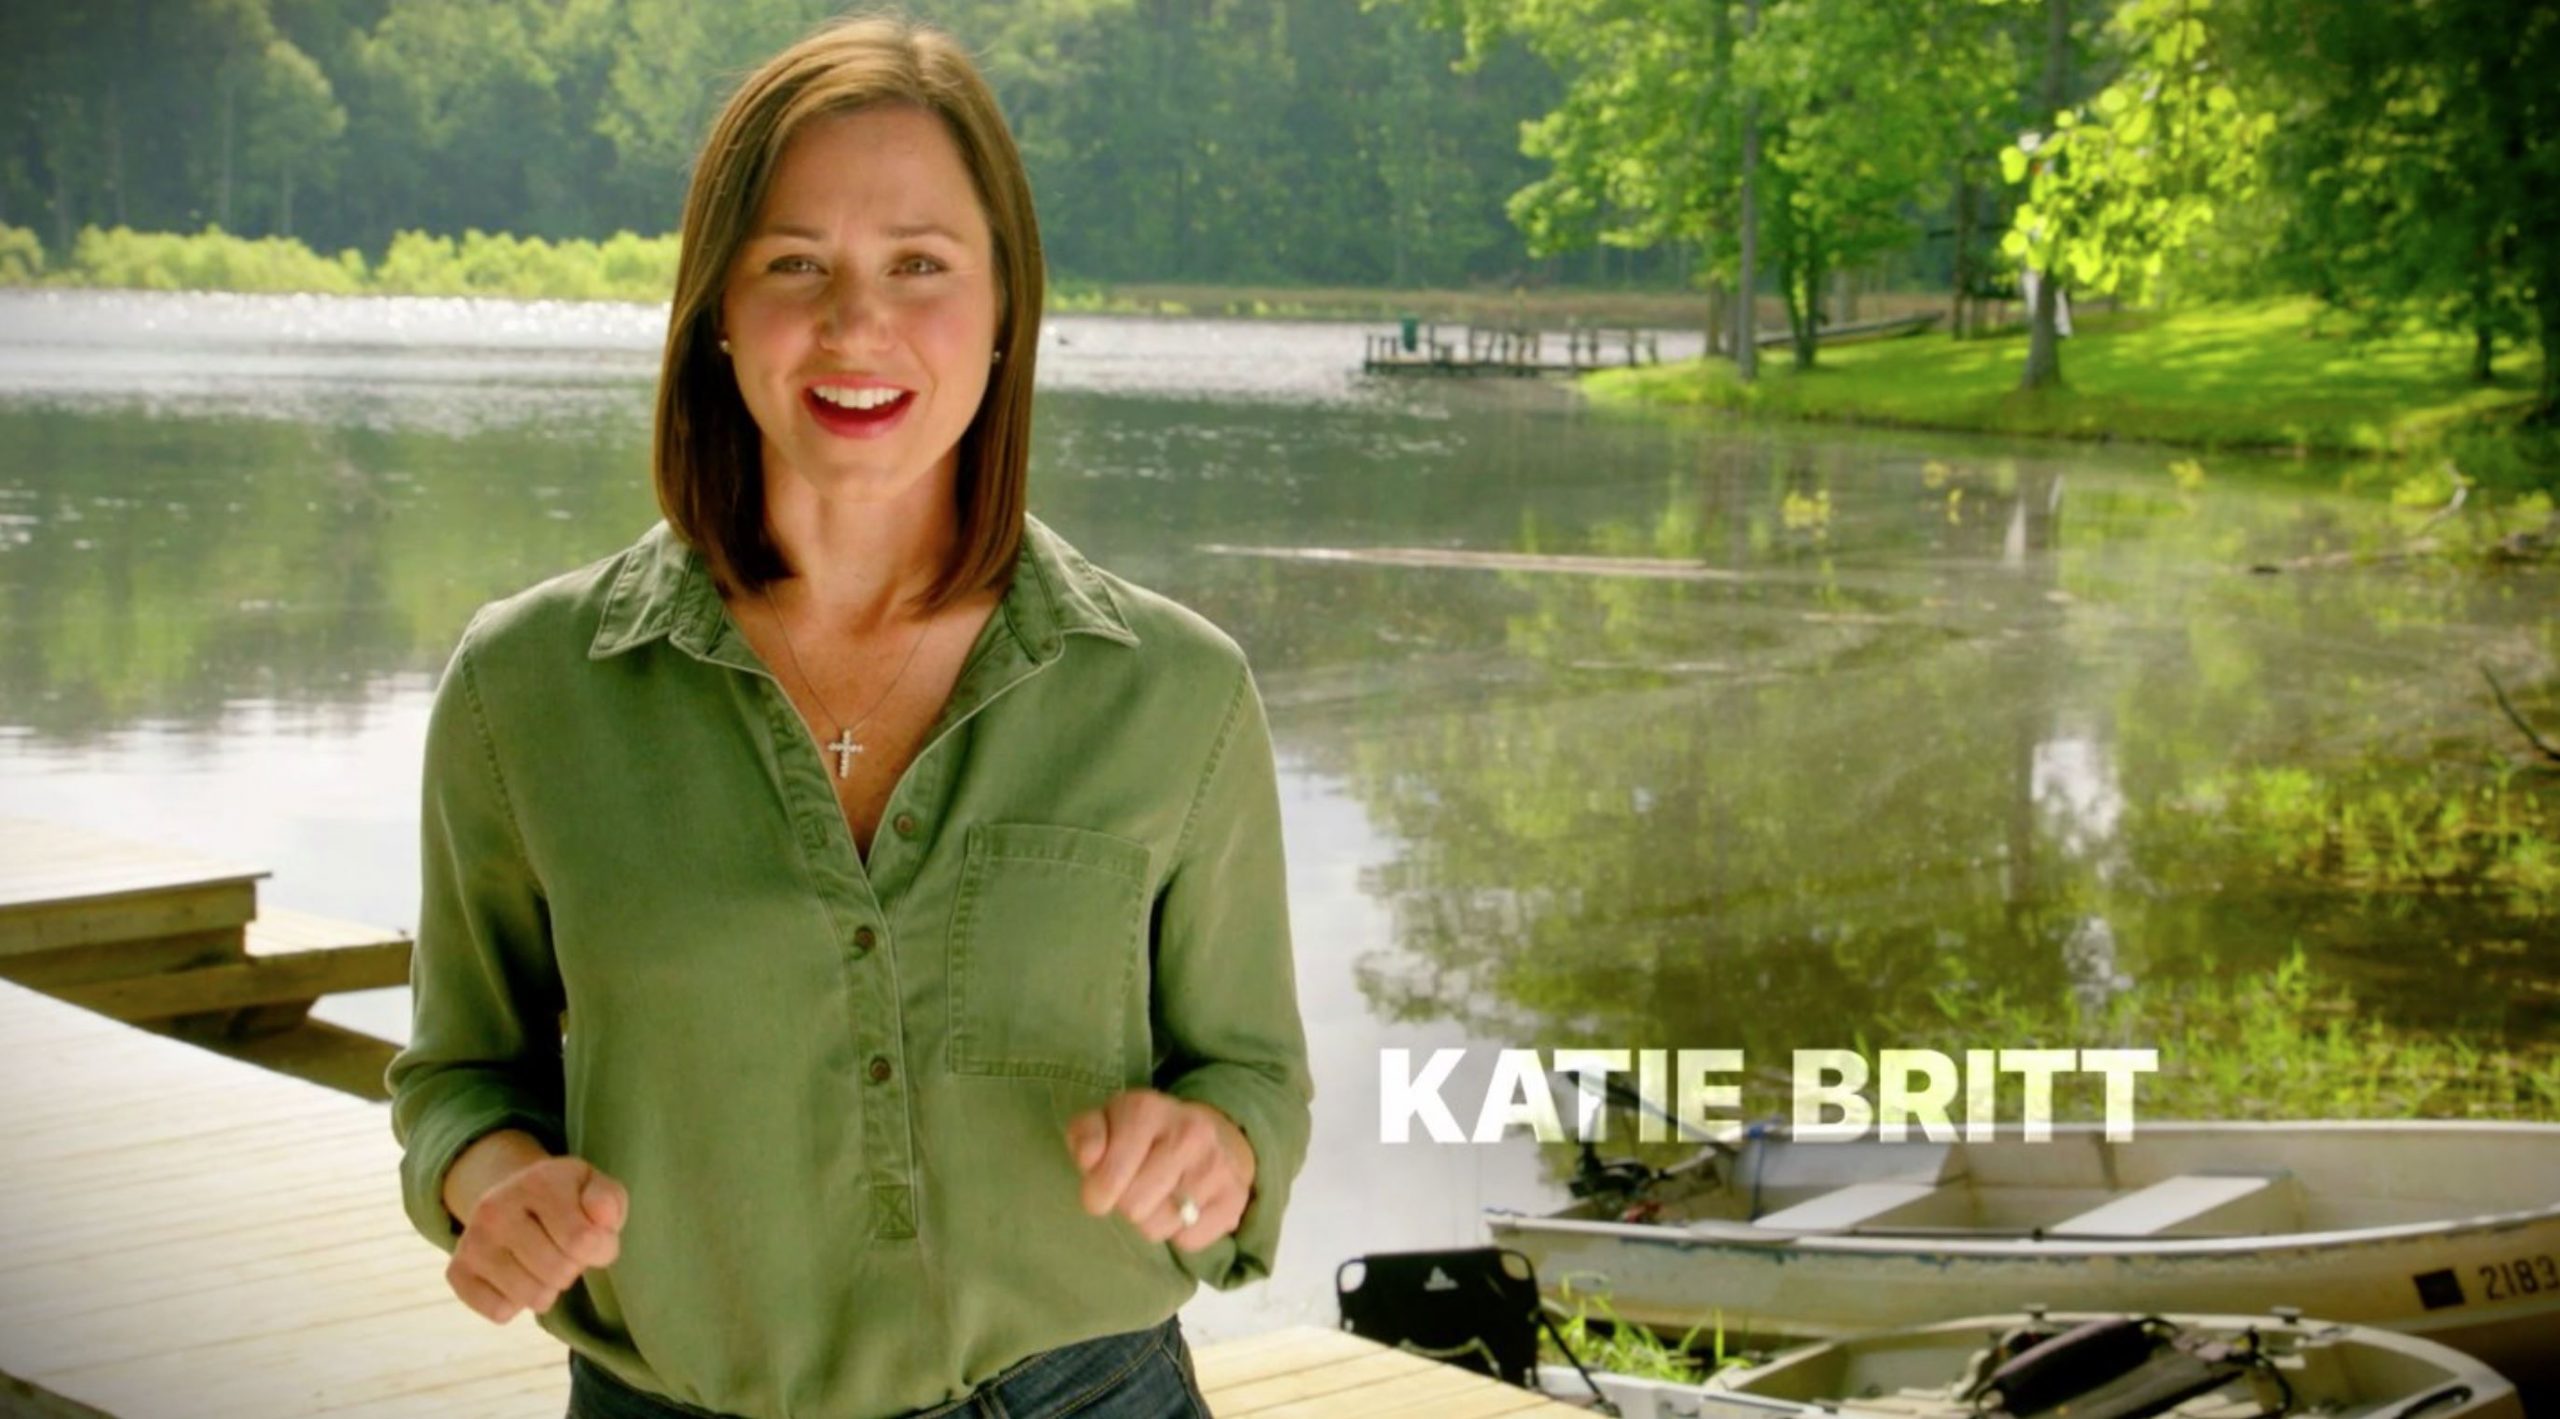 VIDEO: Britt enters US Senate race to replace Shelby in Alabama